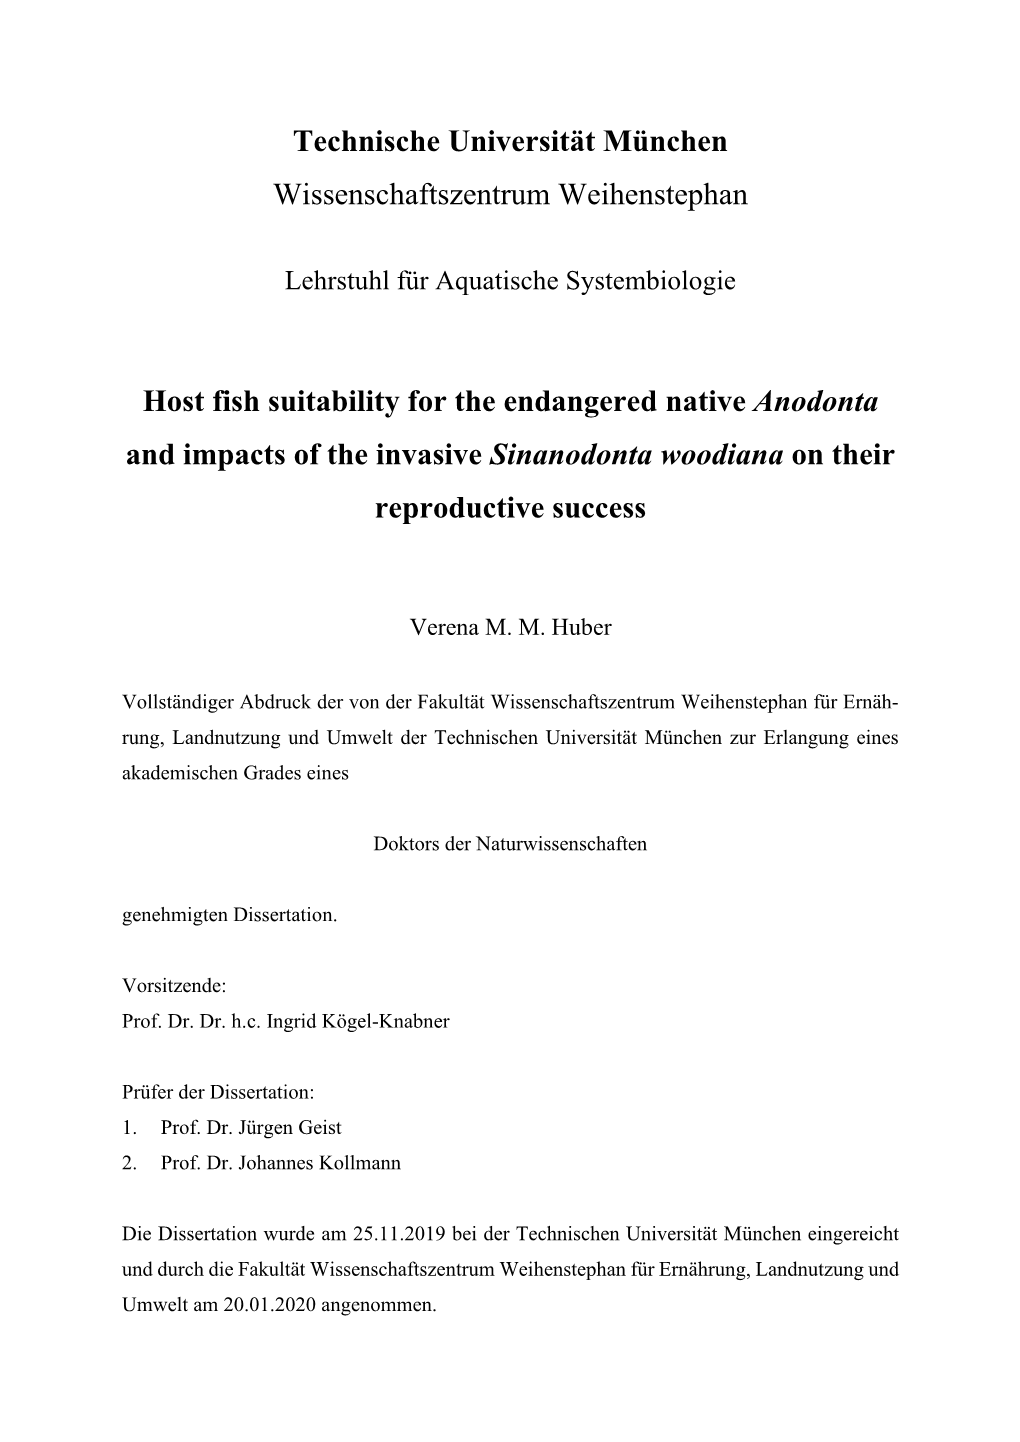 Host Fish Suitability for the Endangered Native Anodonta and Impacts of the Invasive Sinanodonta Woodiana on Their Reproductive Success